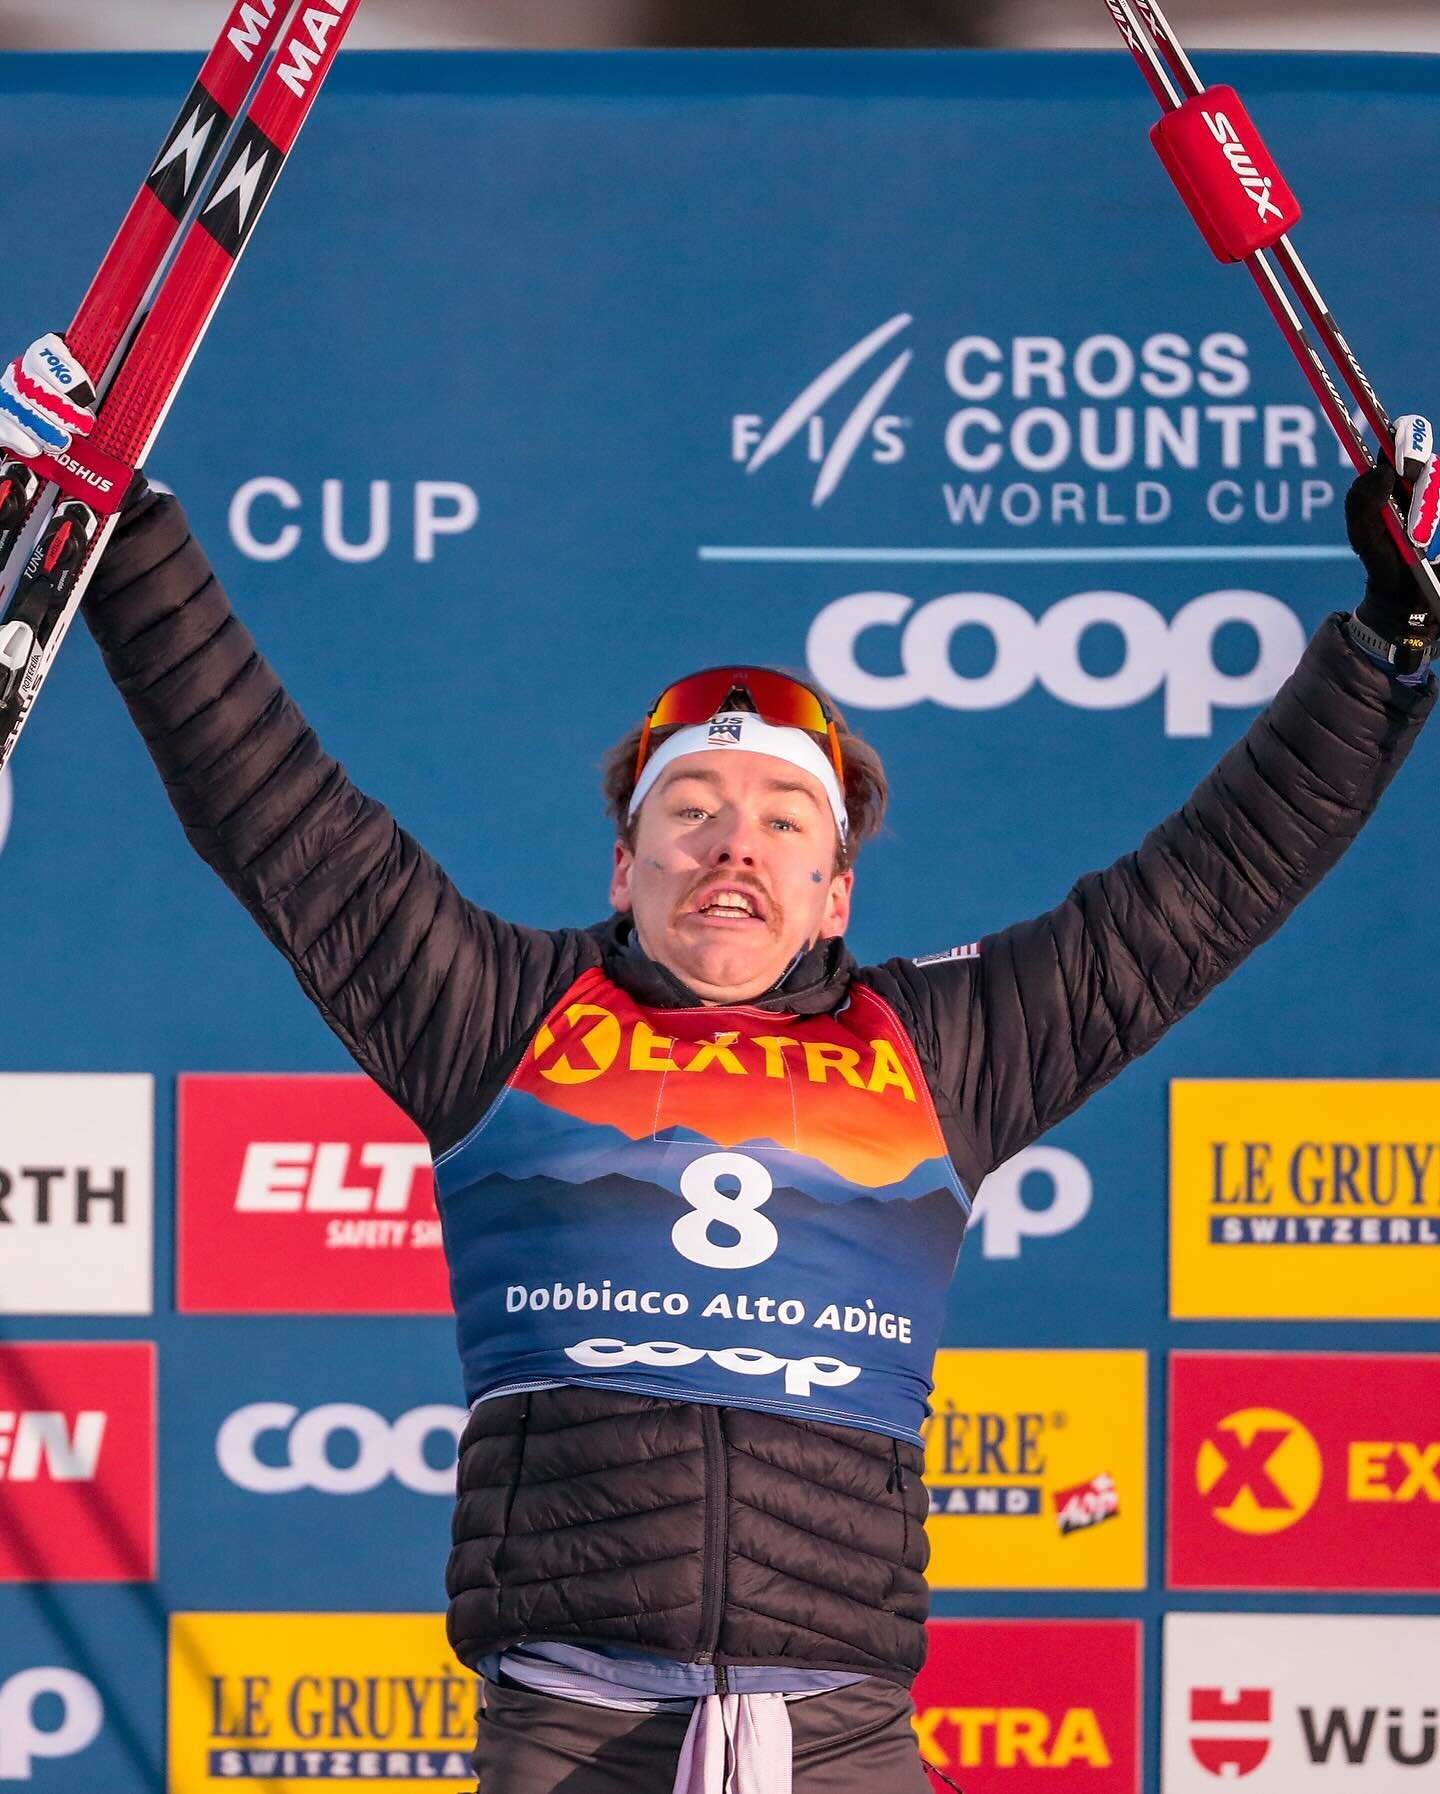 So proud to land on my first World Cup podium today. It is a real privilege to do what I do and I want to thank everyone who has supported the @usskiteam @uvmskiing @smst2team and every other amazing organization that has made this possible.

In ligh